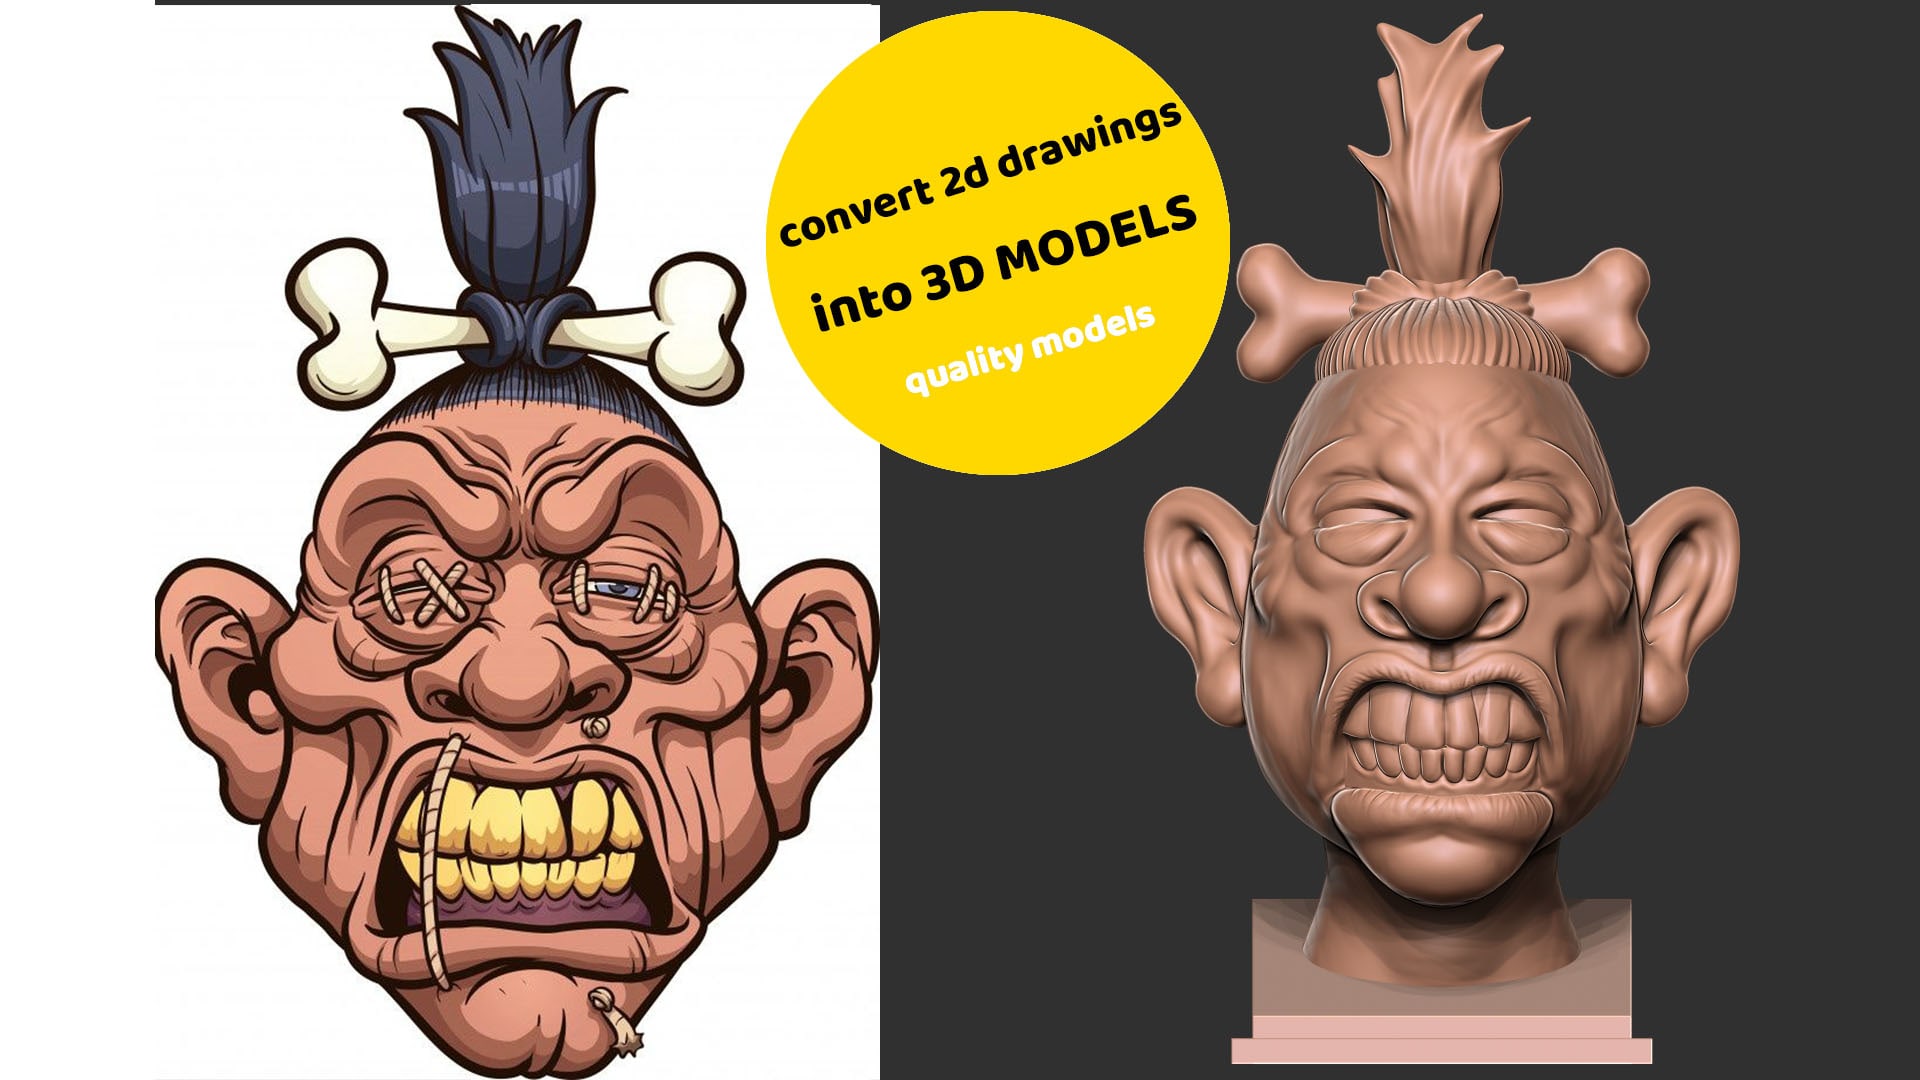 Design 3d modelling for 3d printing using zbrush by Joonazim | Fiverr